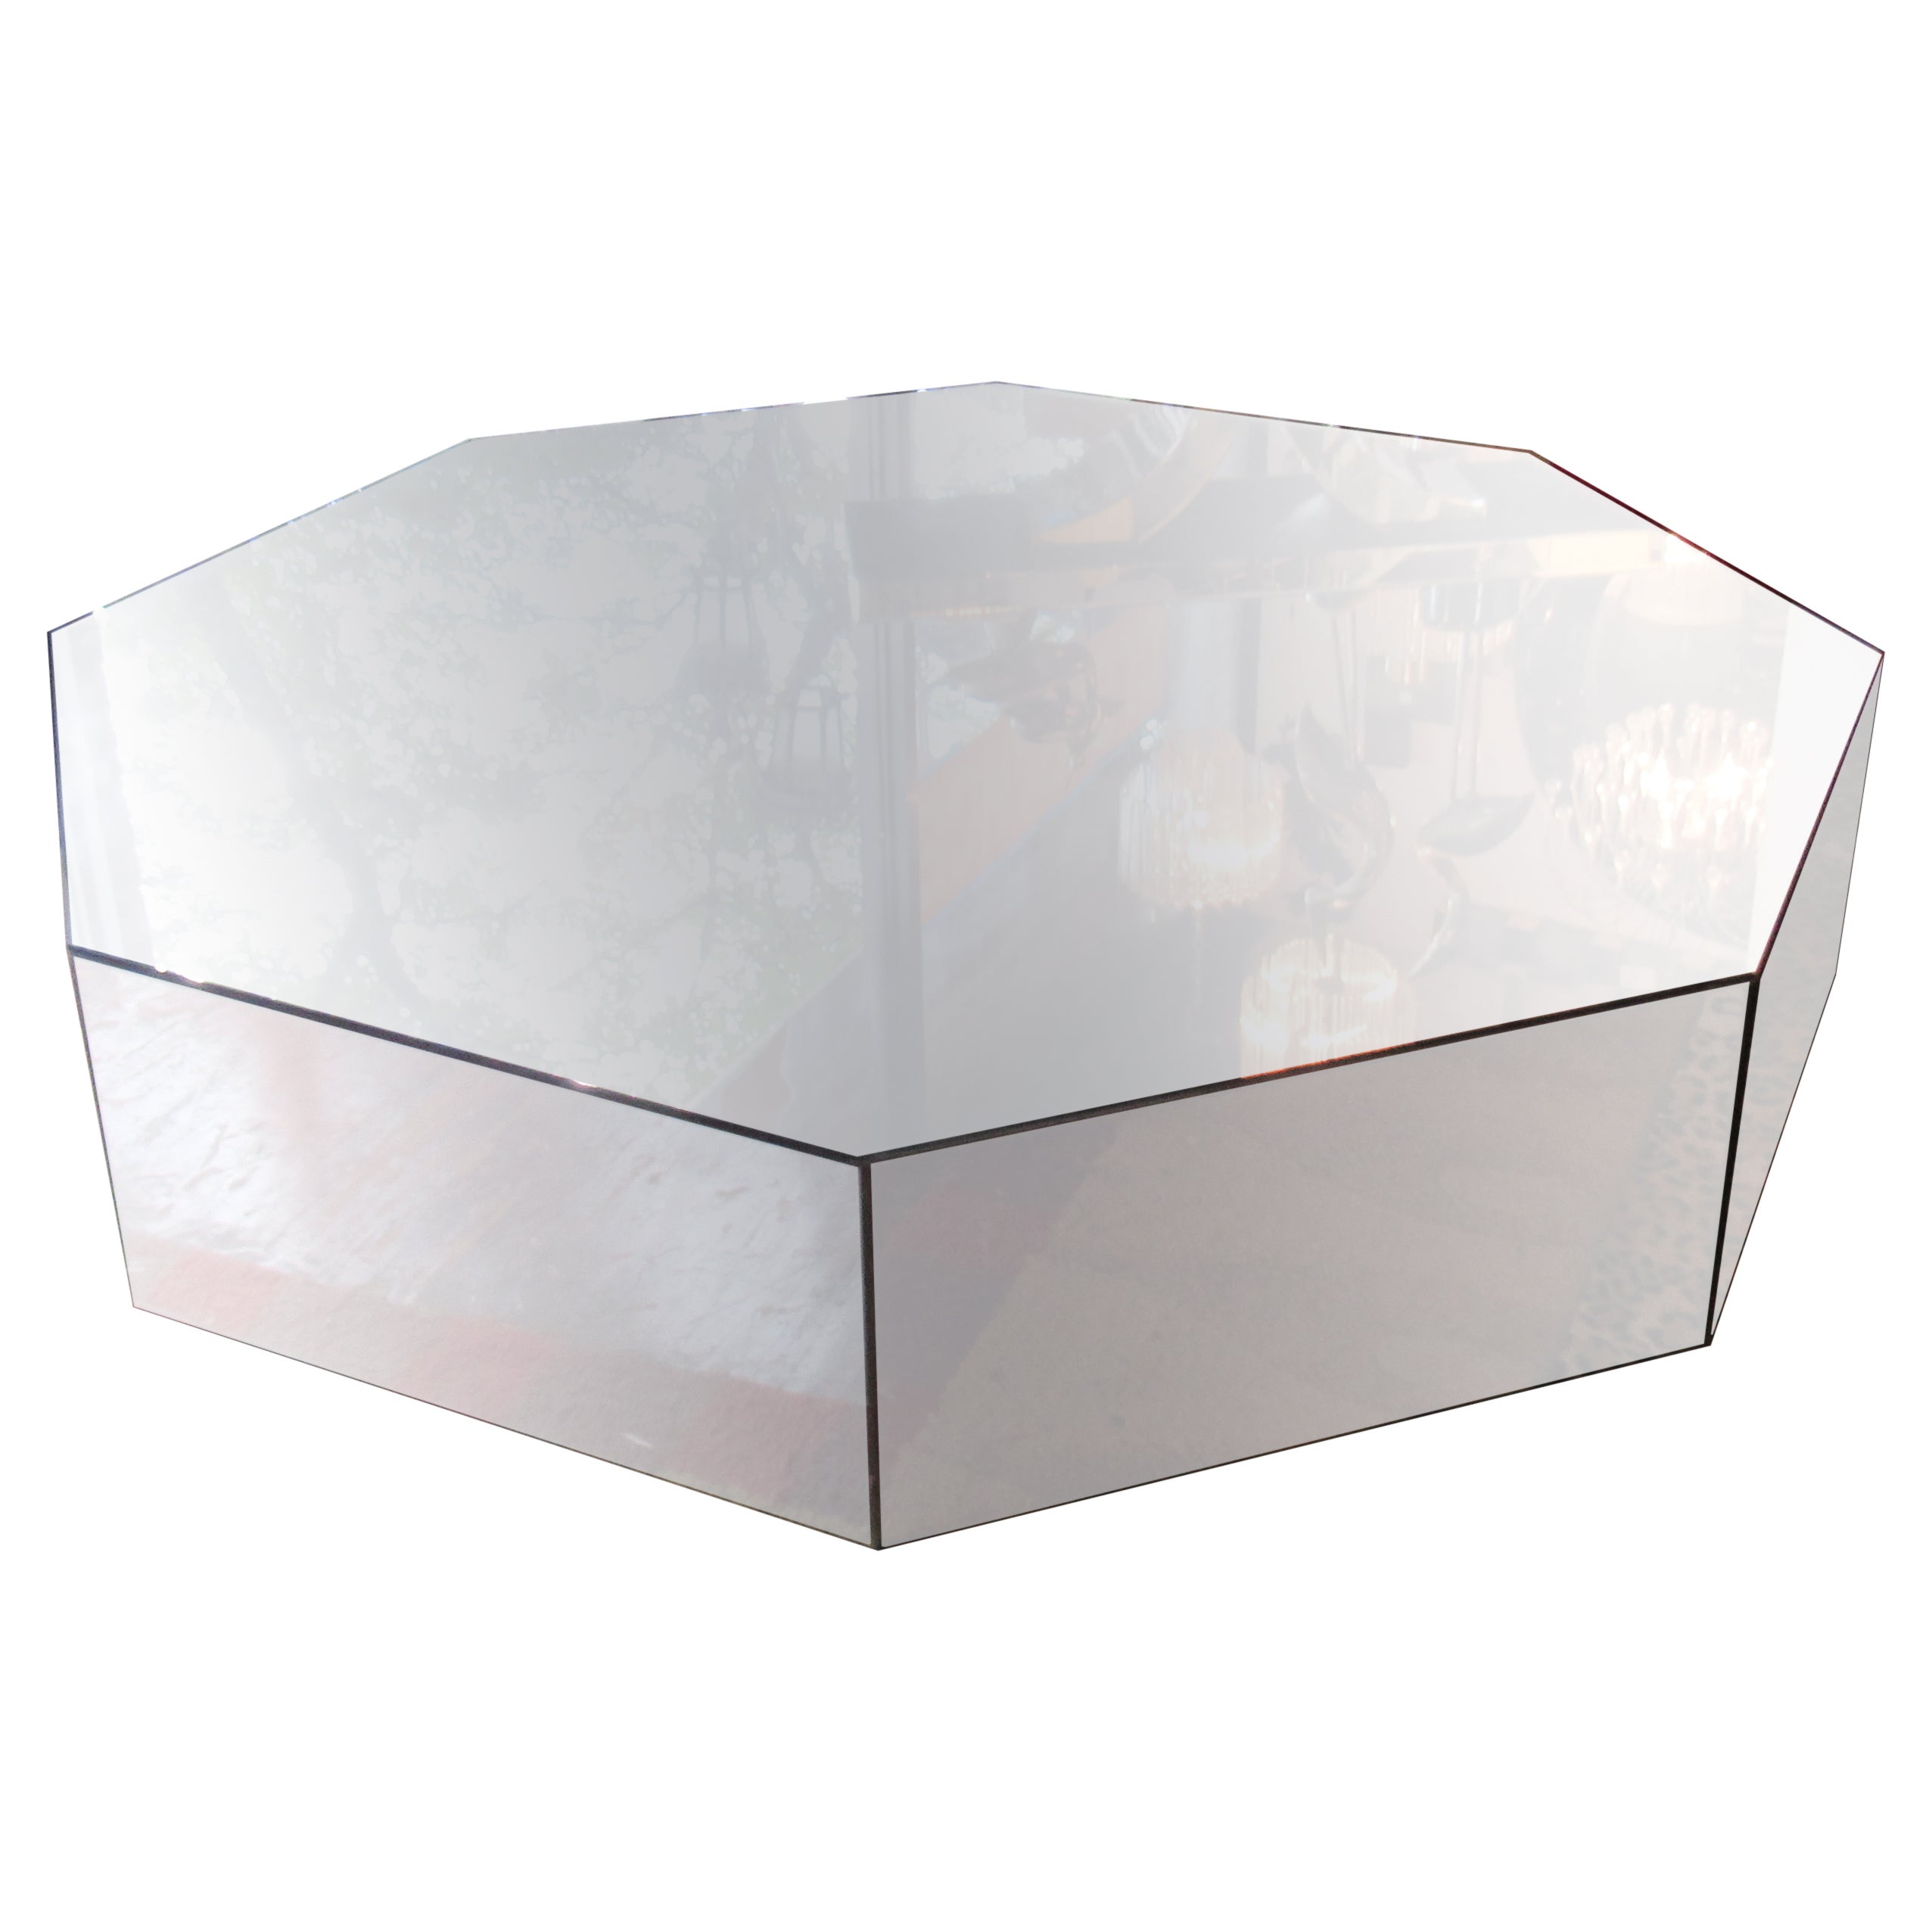 SALE! - Mirrored Glass Coffee Table For Sale